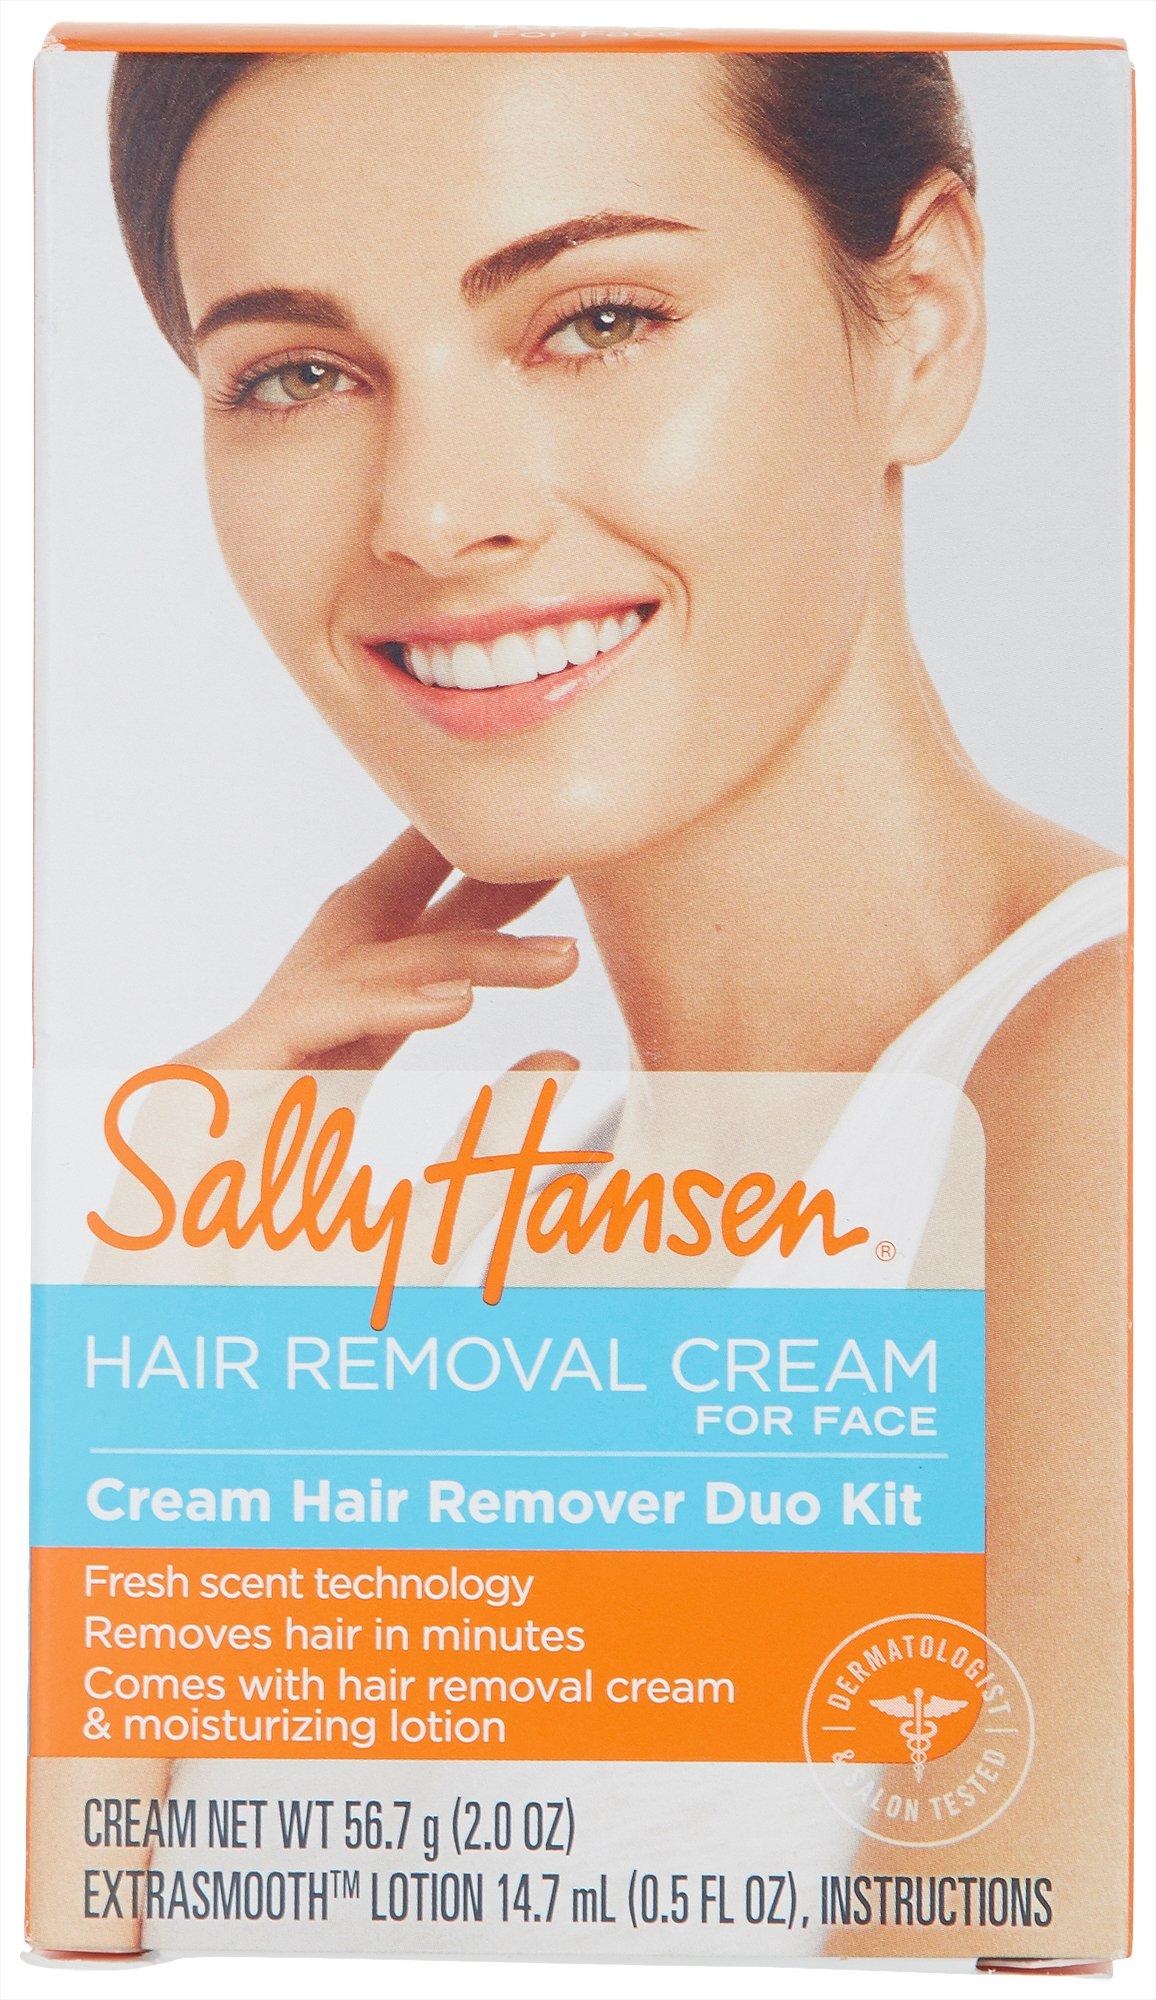 Hair Removal Cream For Face